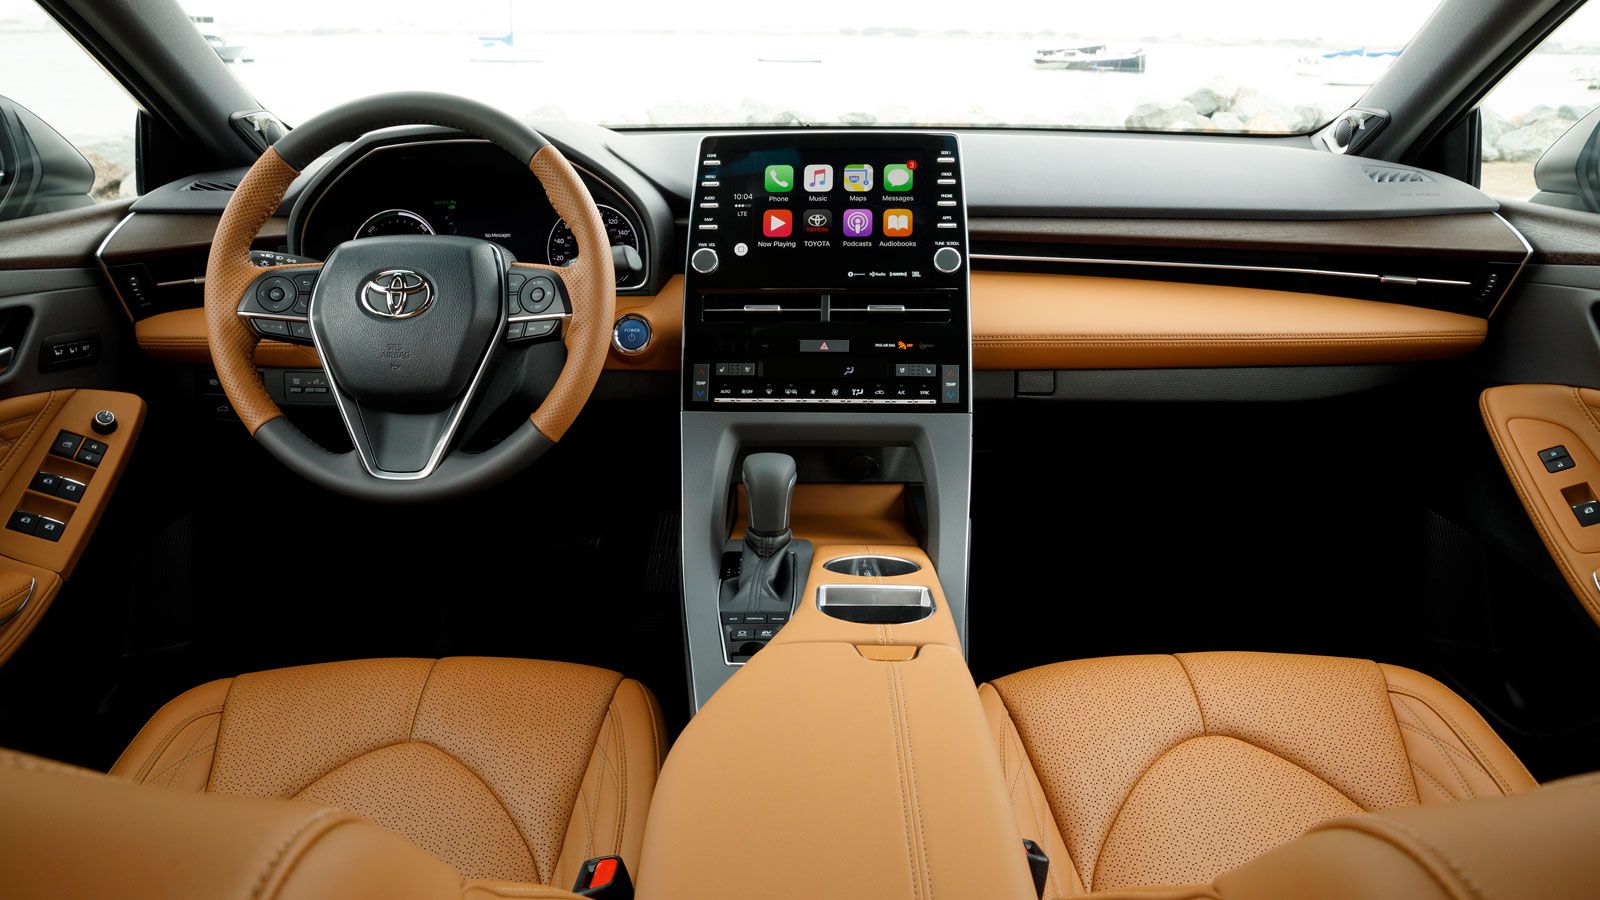 Learn 98+ about toyota avalon 2019 interior latest in.daotaonec